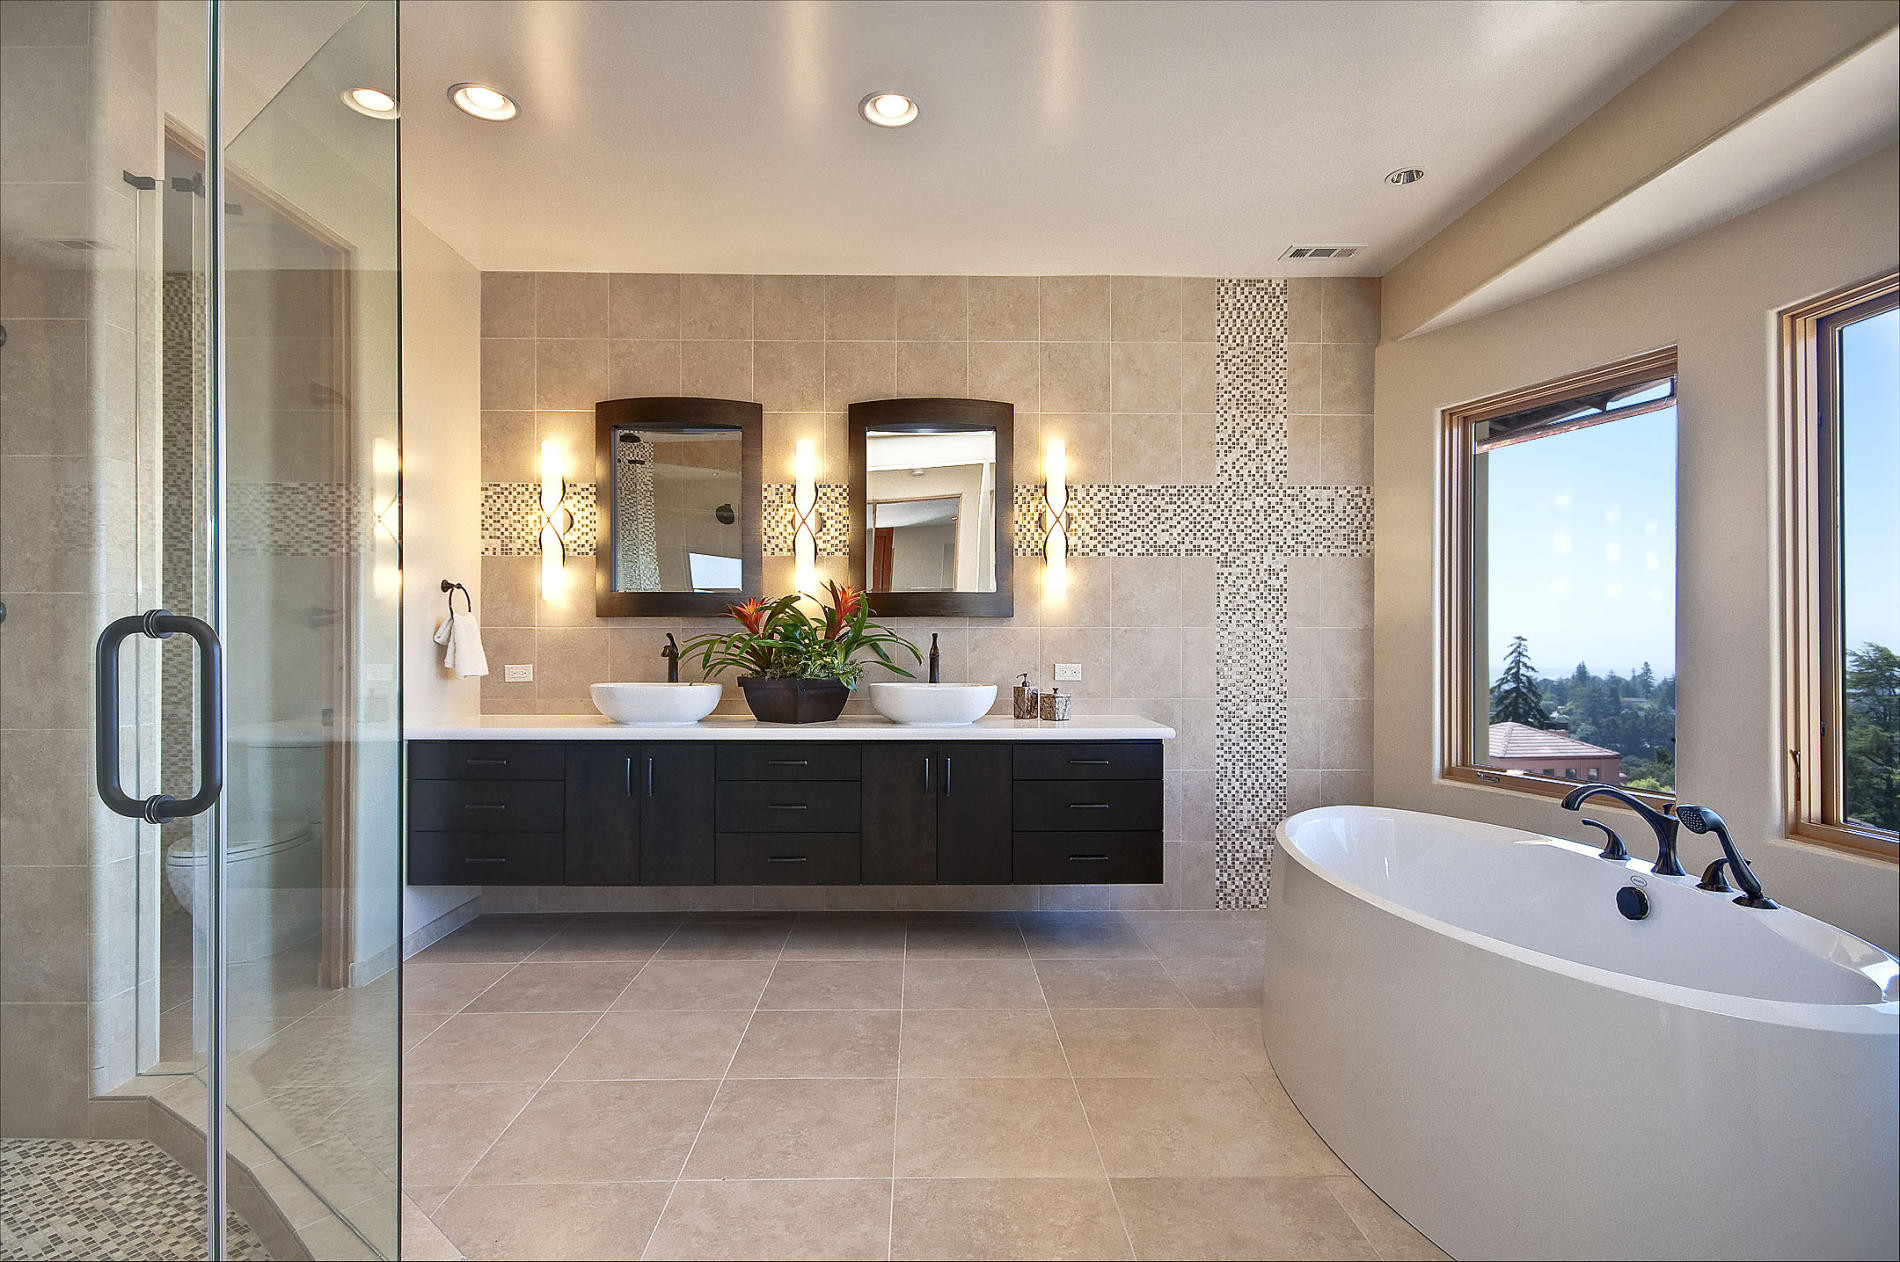 Master Bathroom Pictures
 Why You Should Planning Master Bathroom Layouts MidCityEast